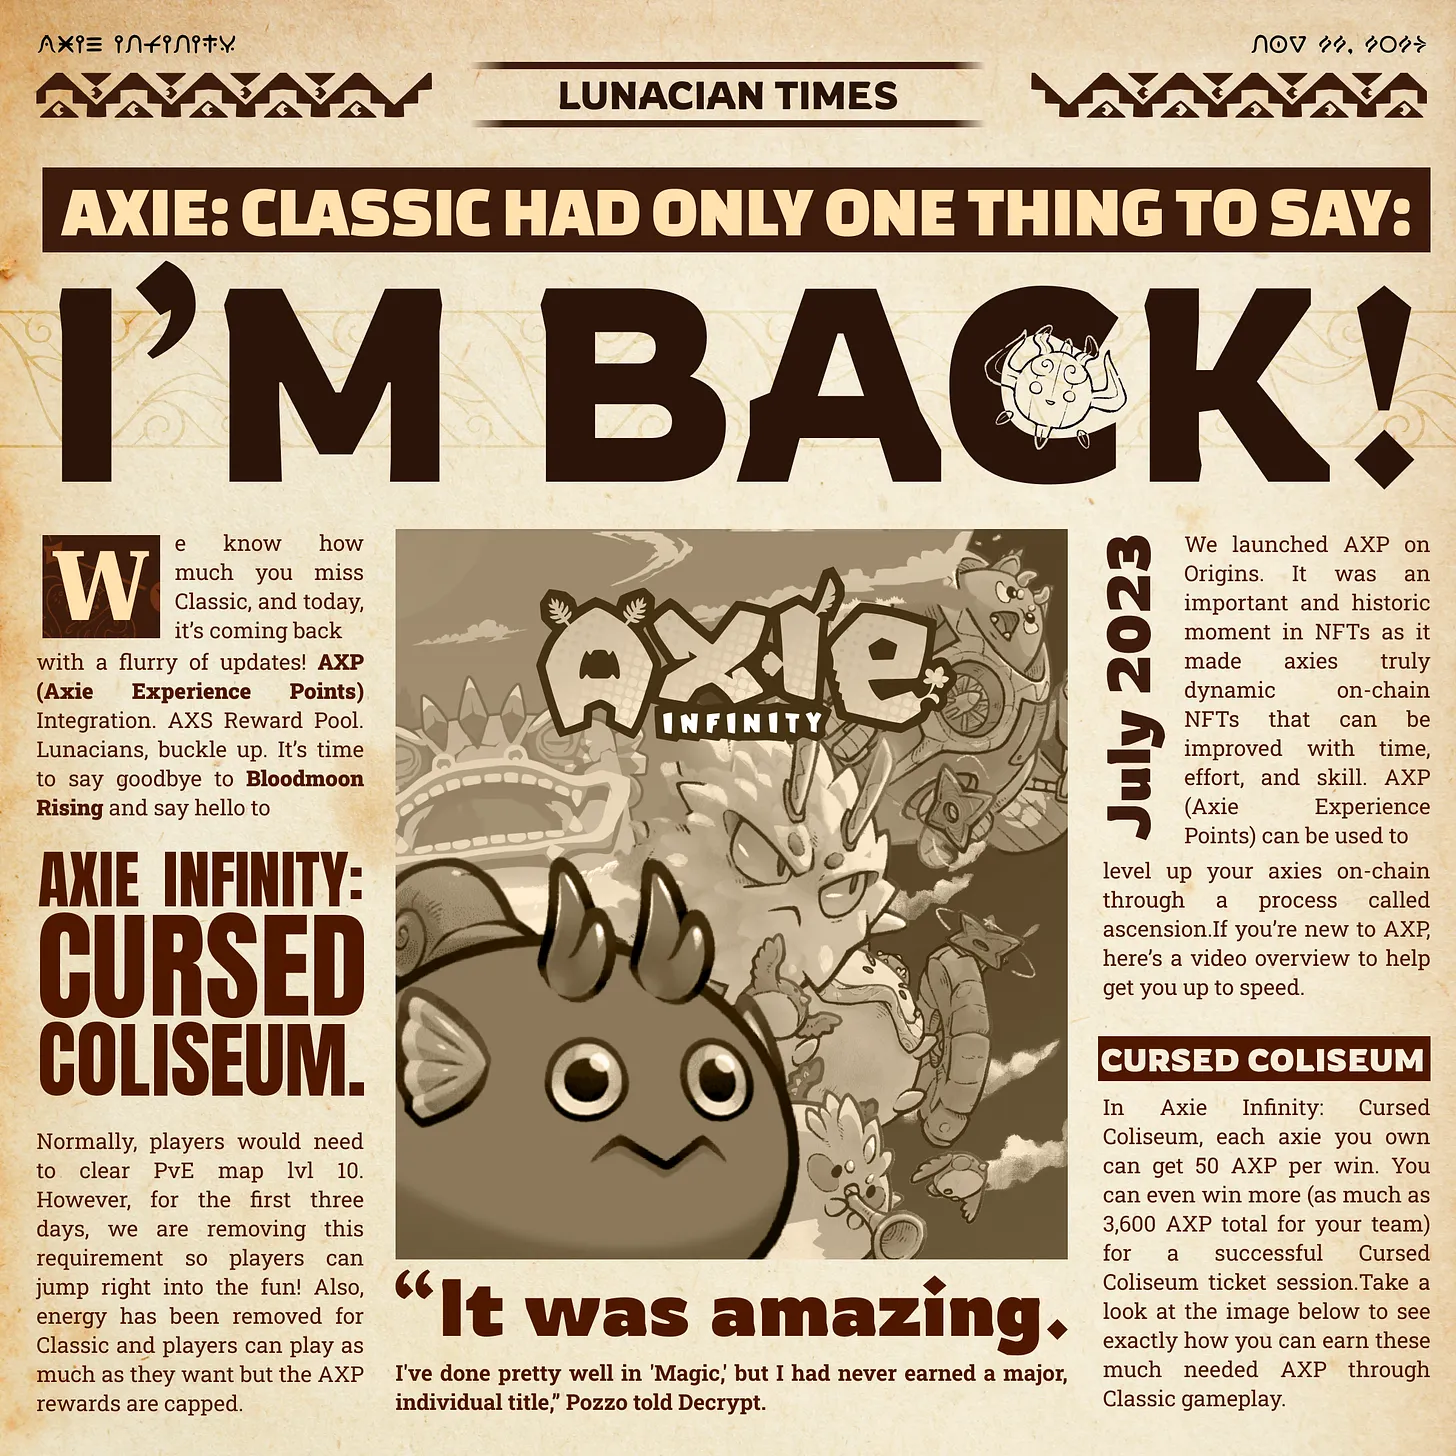 axie infinity classic • Axie Classic is back! Bloodmoon Rising is now Cursed Coliseum! However, the Cursed Coliseum is more than a name: there are actual curses in the Coliseum!• Starting today, players can earn up to 2,400 AXP per axie every day in Axie Classic. 1 victory = 50 AXP per axie. More details below.• Introducing the Grand Tournament Game Mode! Compete against the fiercest warriors in Lunacia for the ultimate prize — a Mystic axie.